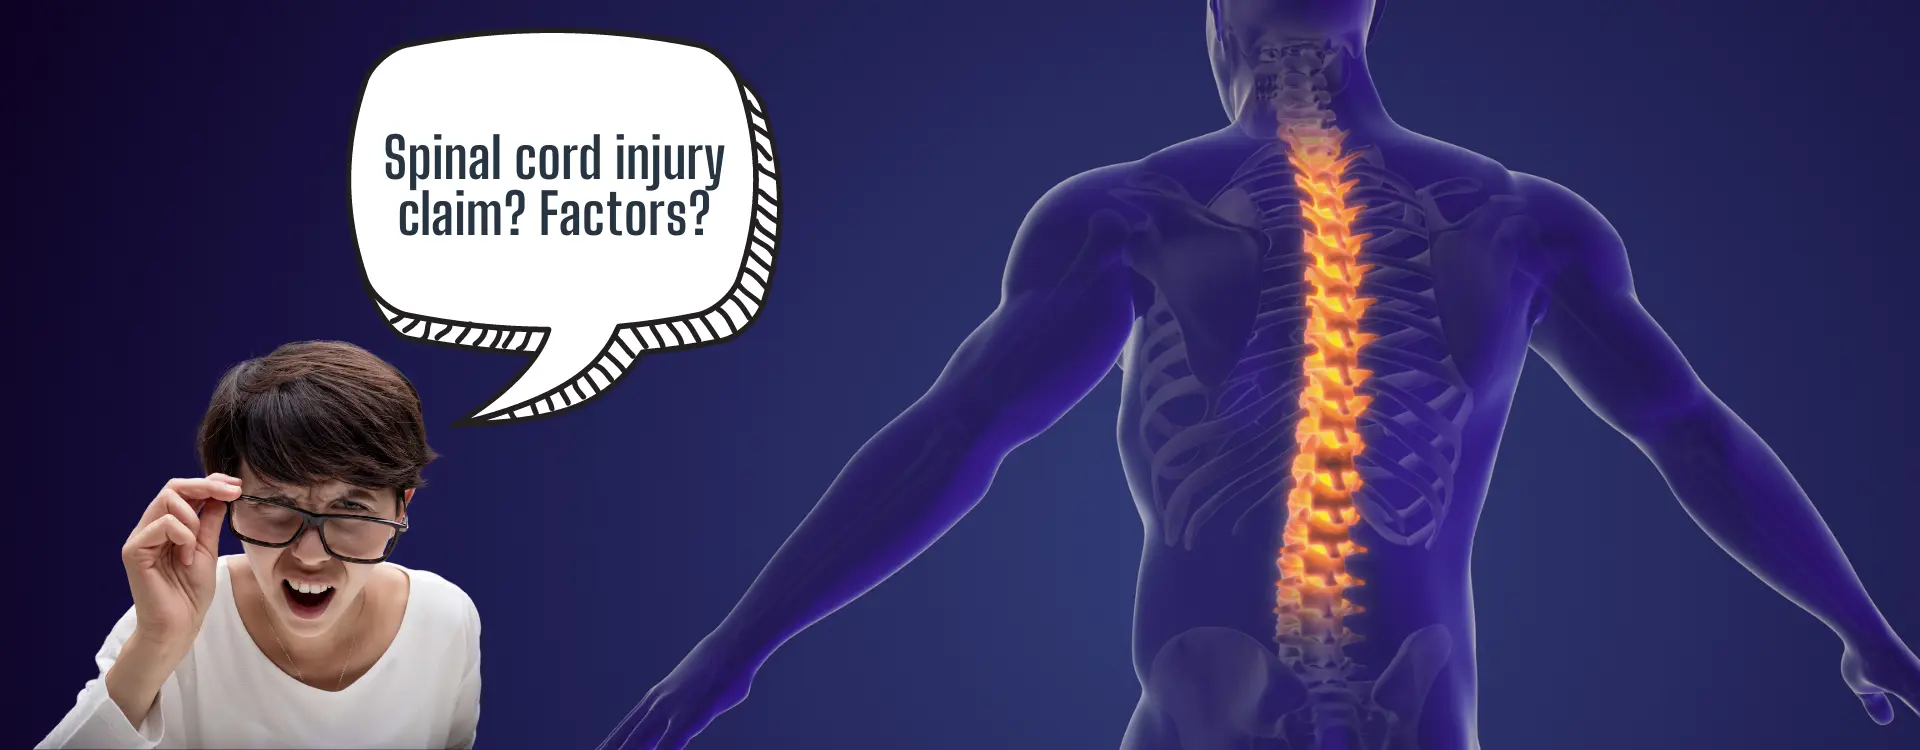 factors affecting the value of a spinal cord injury claim